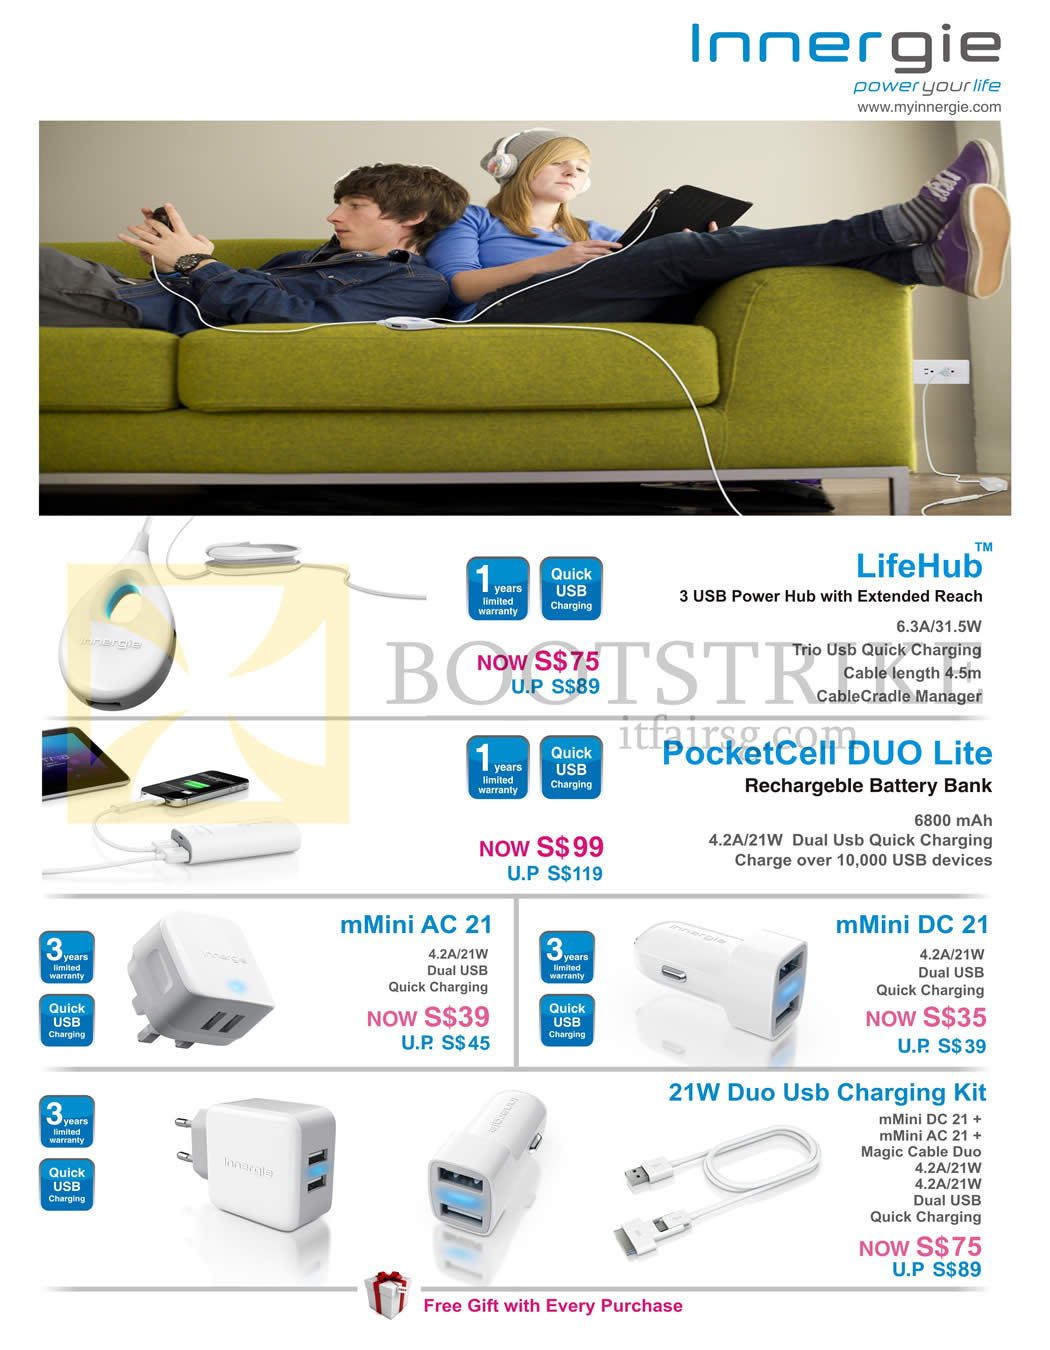 IT SHOW 2014 price list image brochure of EpiCentre Innergie LifeHub USB Hub, PocketCell Duo Lite Power Bank, MMini AC, DC, 21W Duo USB Charging Kit